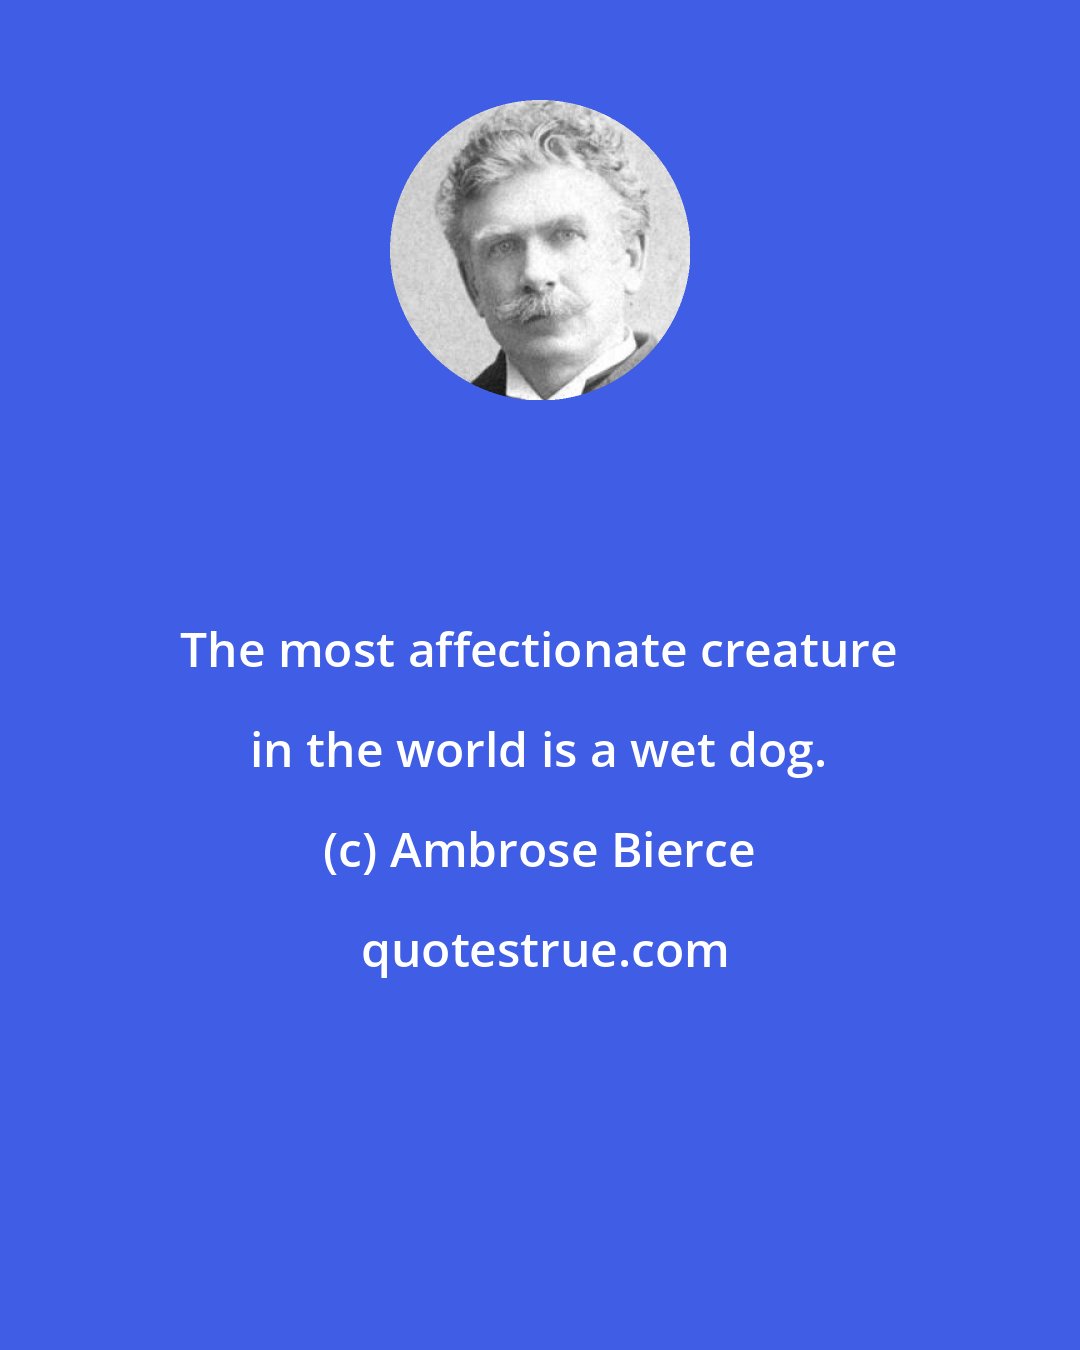 Ambrose Bierce: The most affectionate creature in the world is a wet dog.